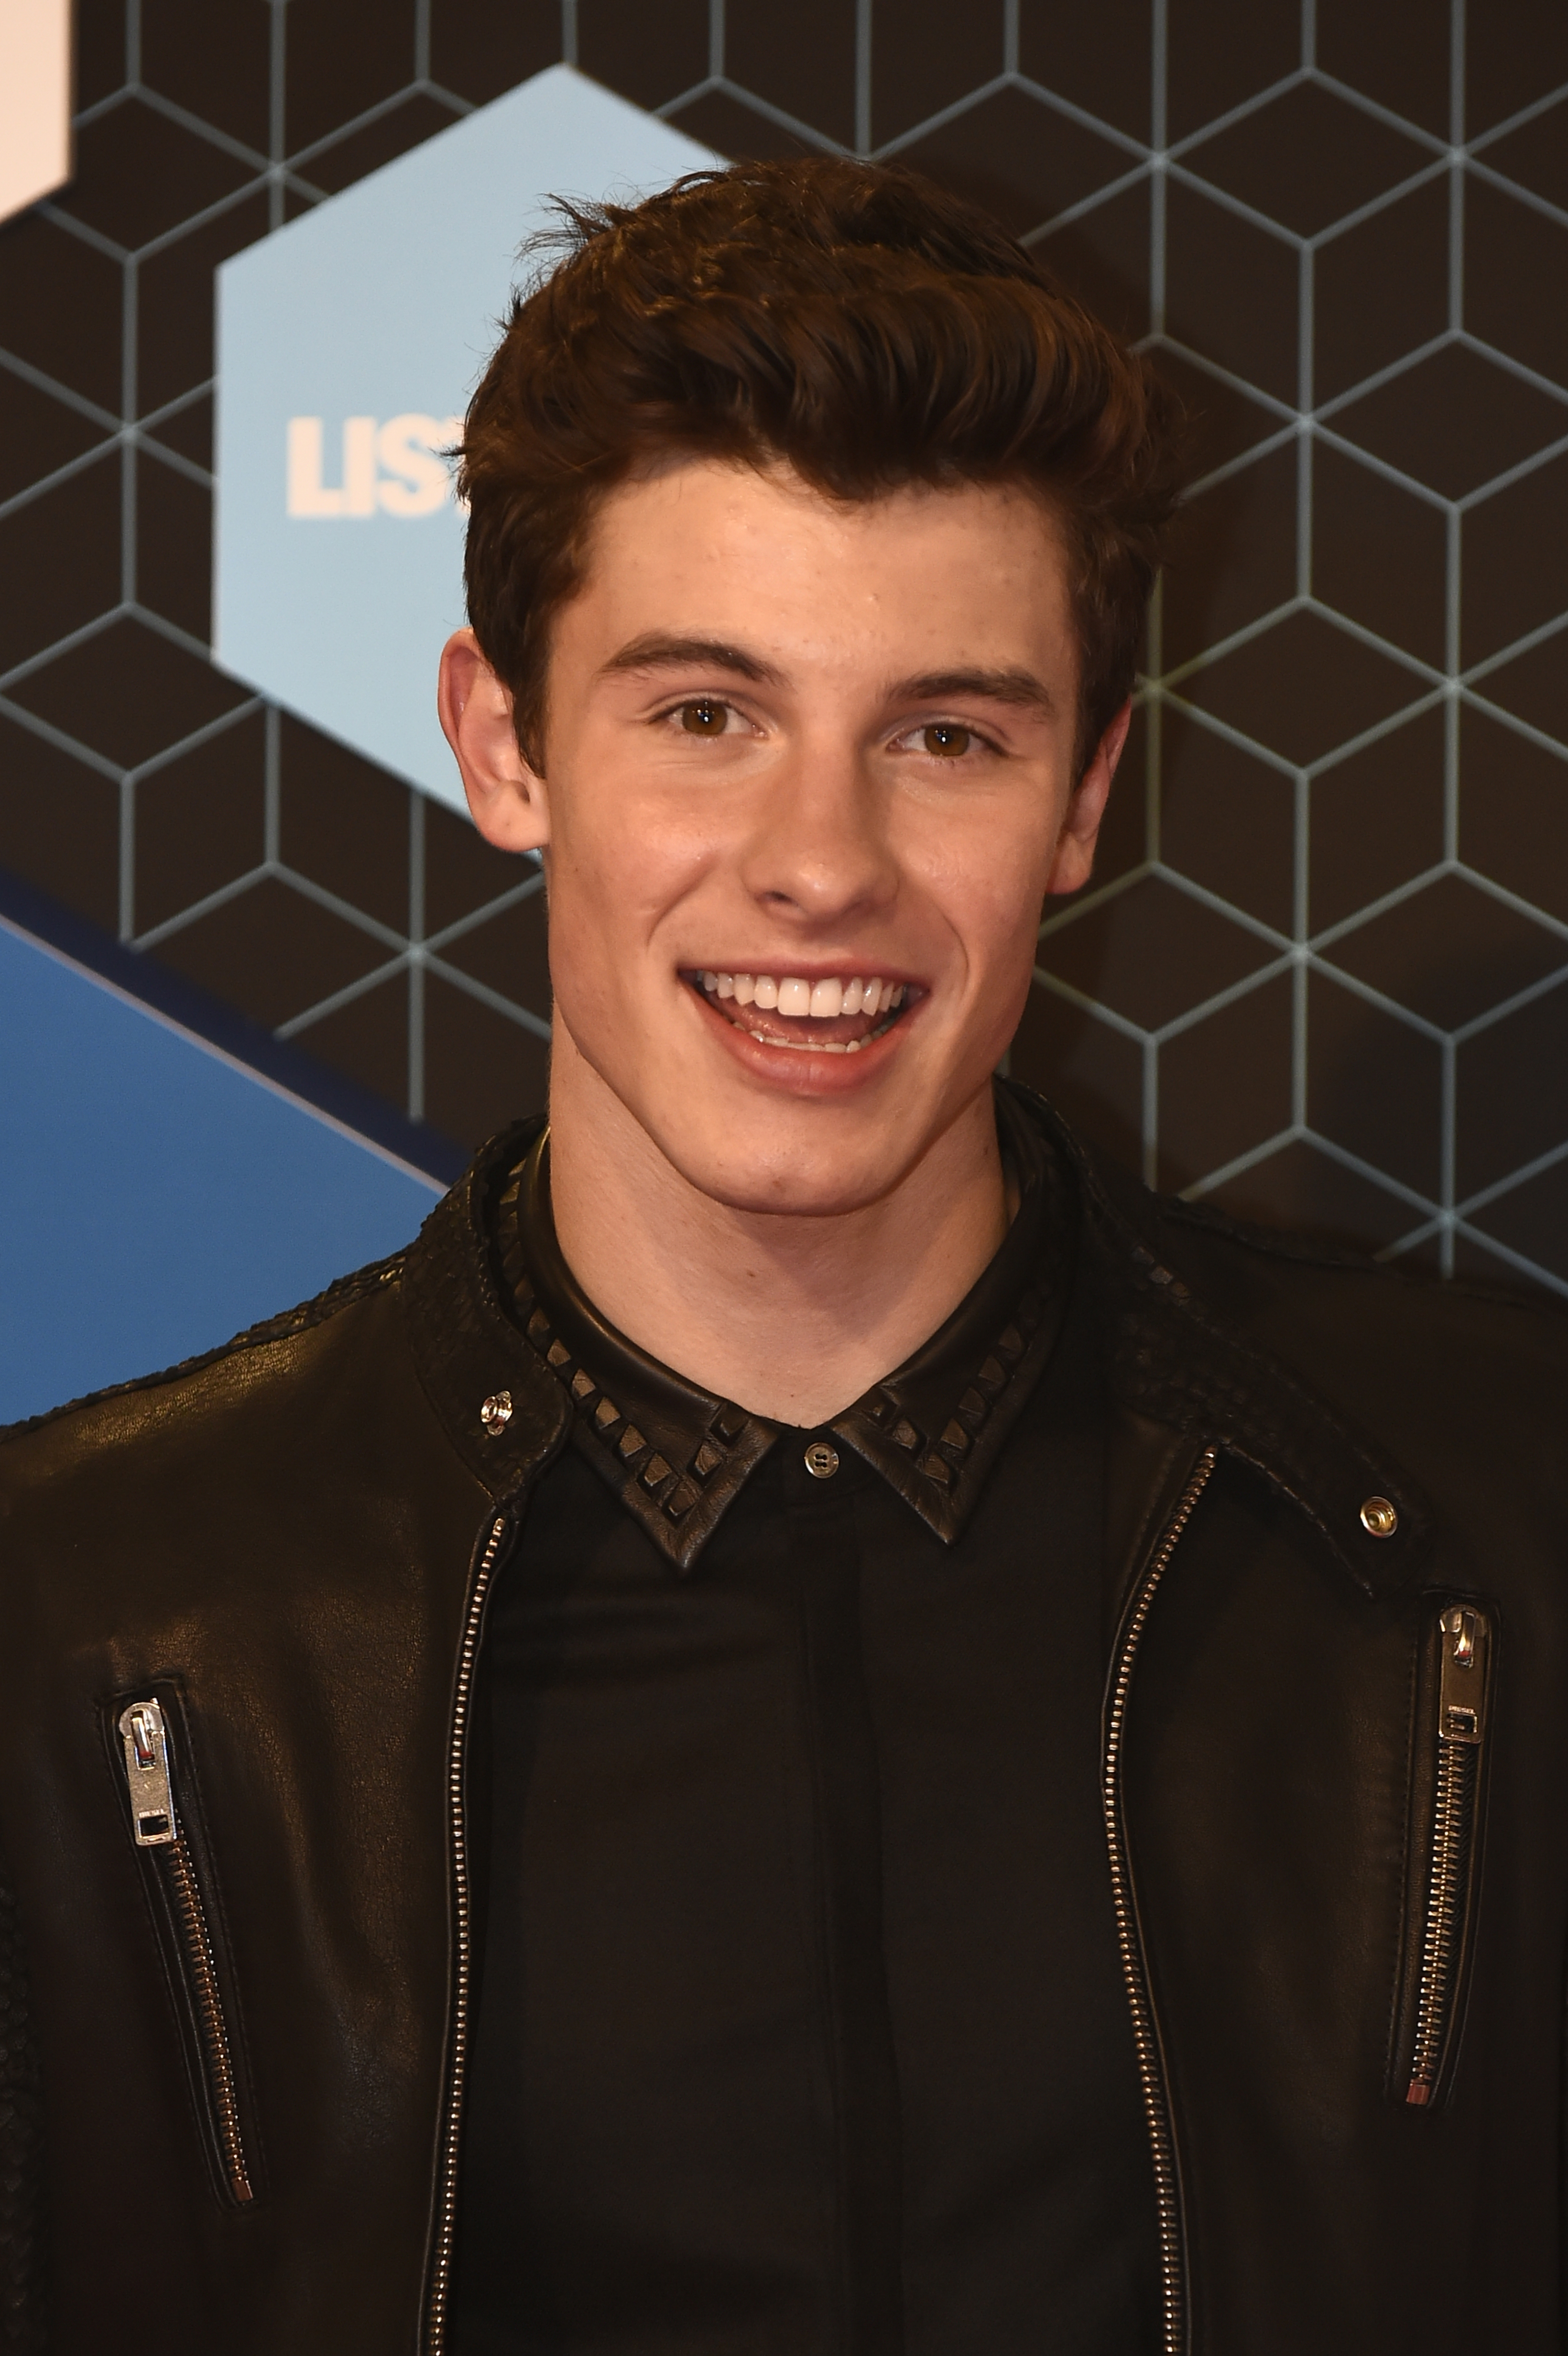 Canada's singer Shawn Mendes poses on the red carpet at the MTV Europe Music Awards (EMA) on November 6, 2016 at the Ahoy Rotterdam in Rotterdam. / AFP PHOTO / JOHN THYS